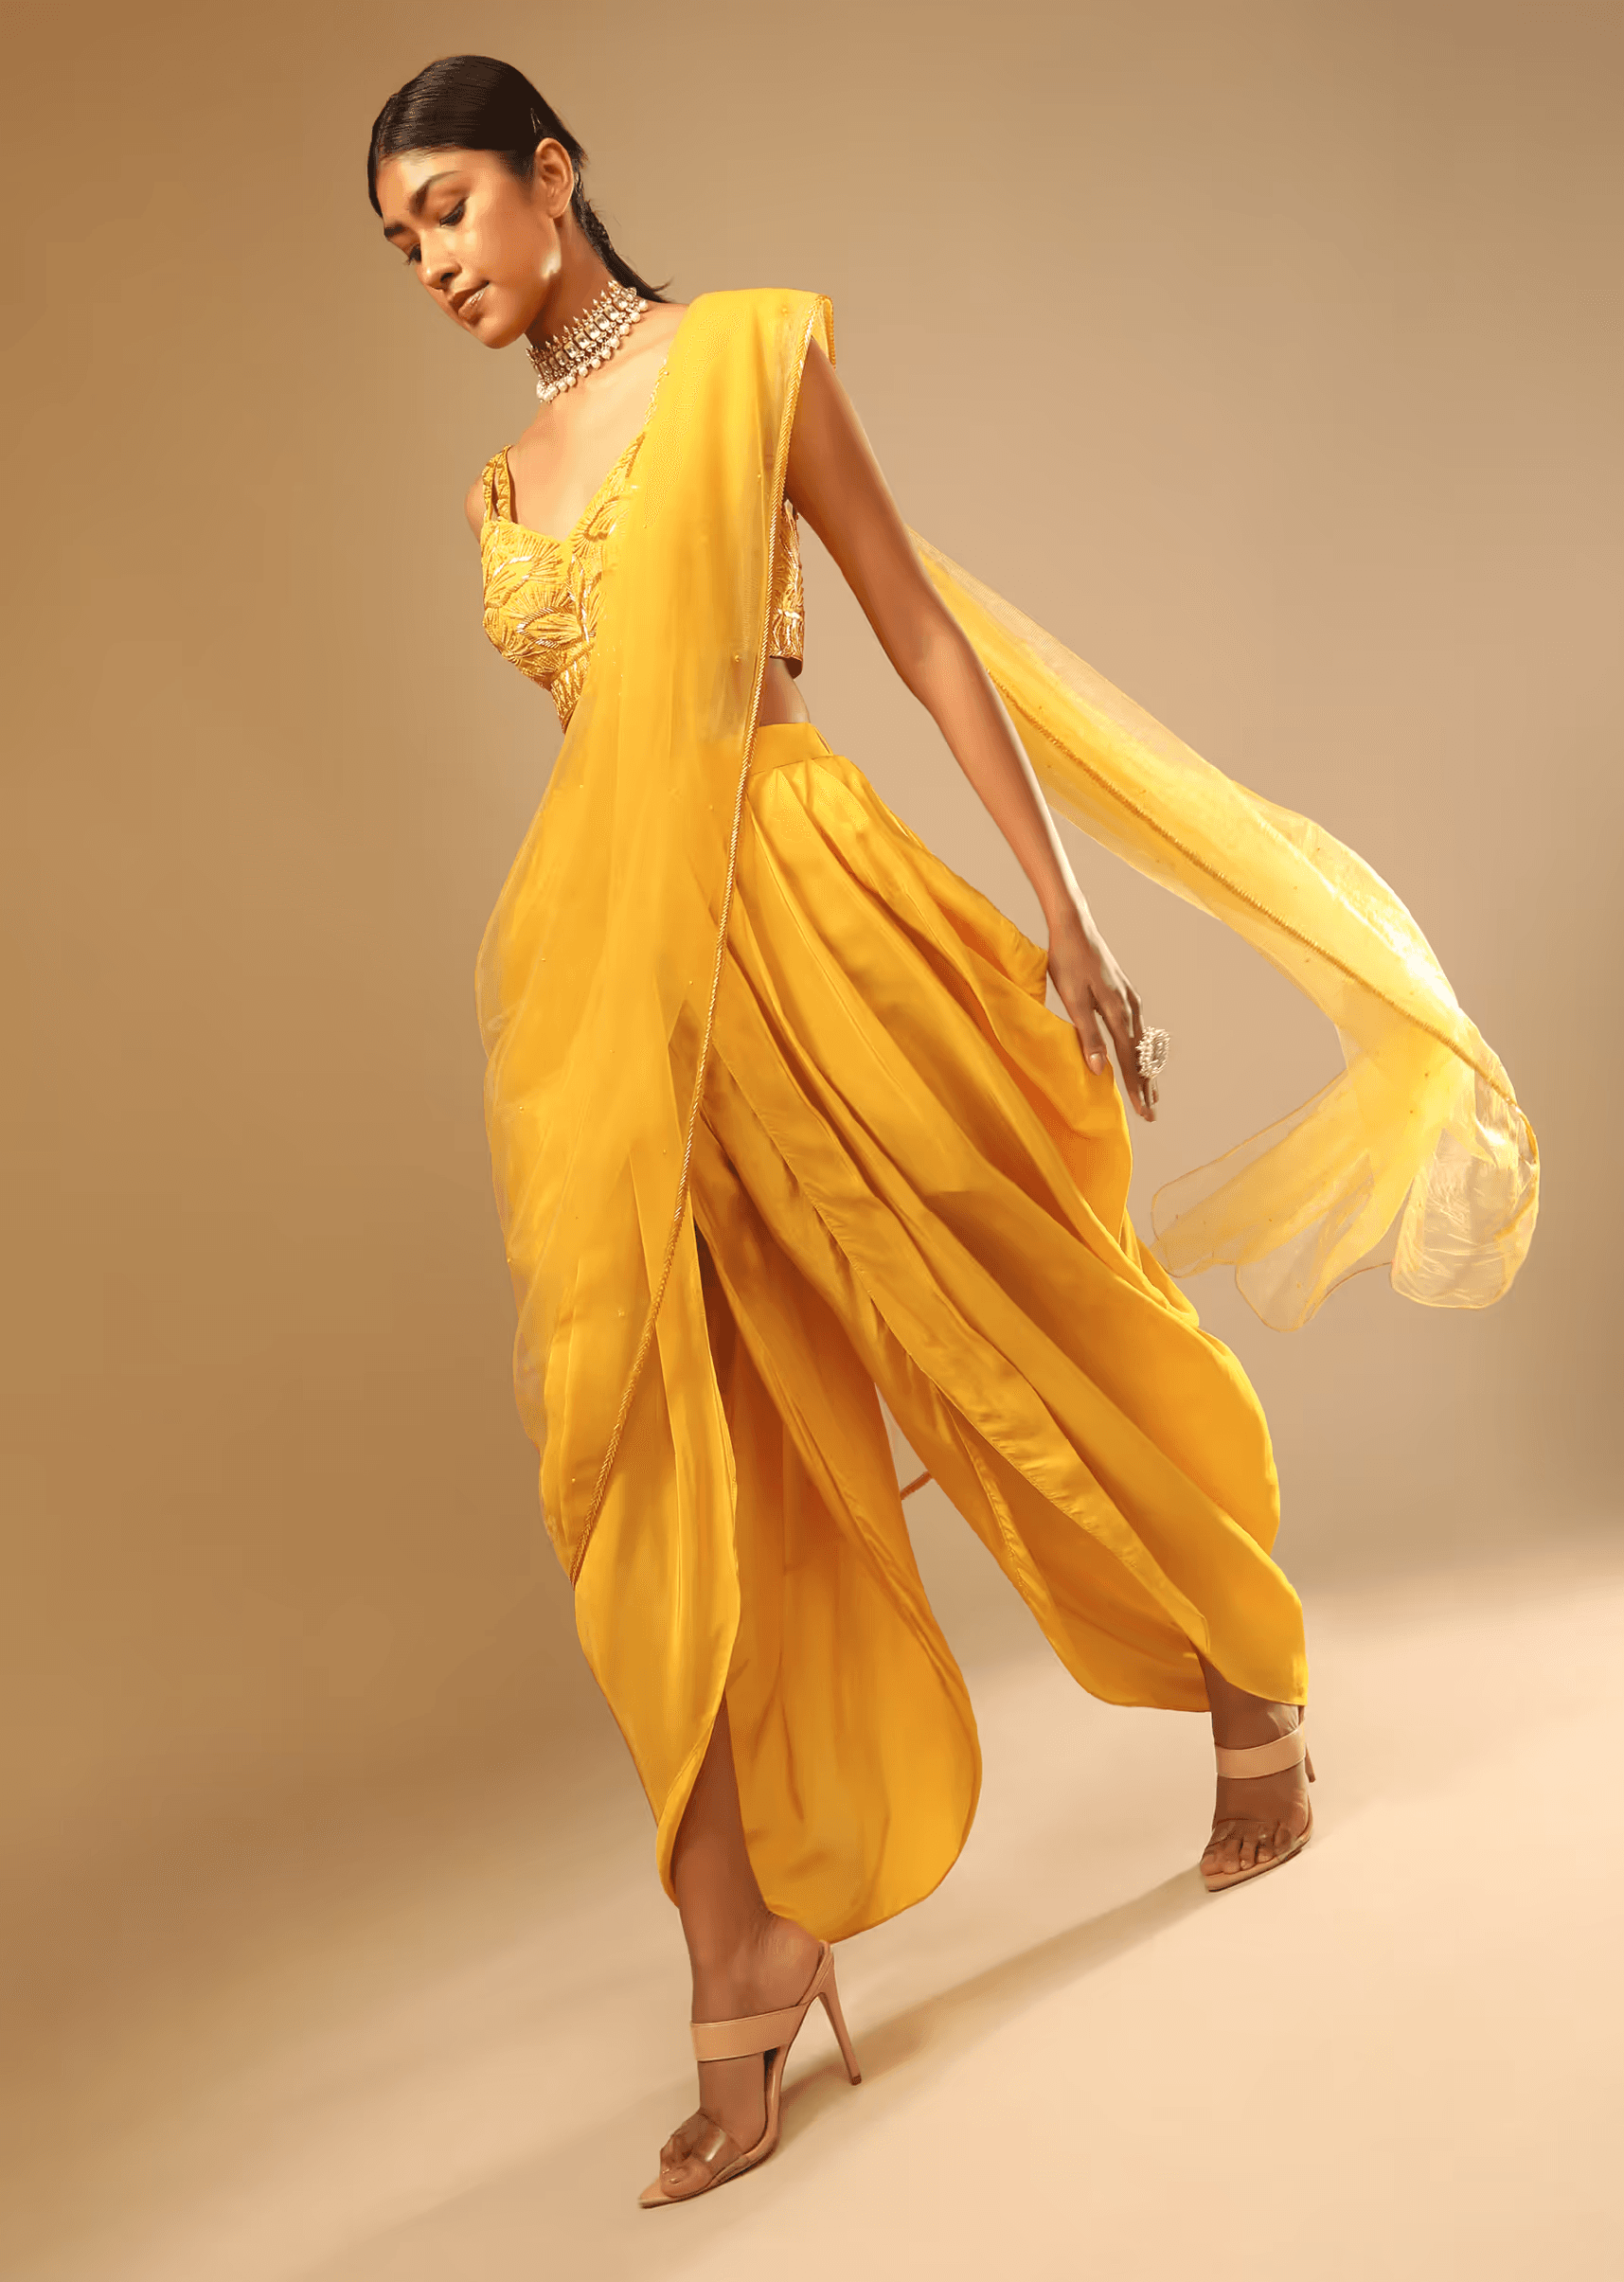 Kalki Fashion,M001G3013Y-SG73709,Corn Yellow Dhoti And Crop Top Suit With Hand Embroidered Leaf Motifs And A Matching Dupatta